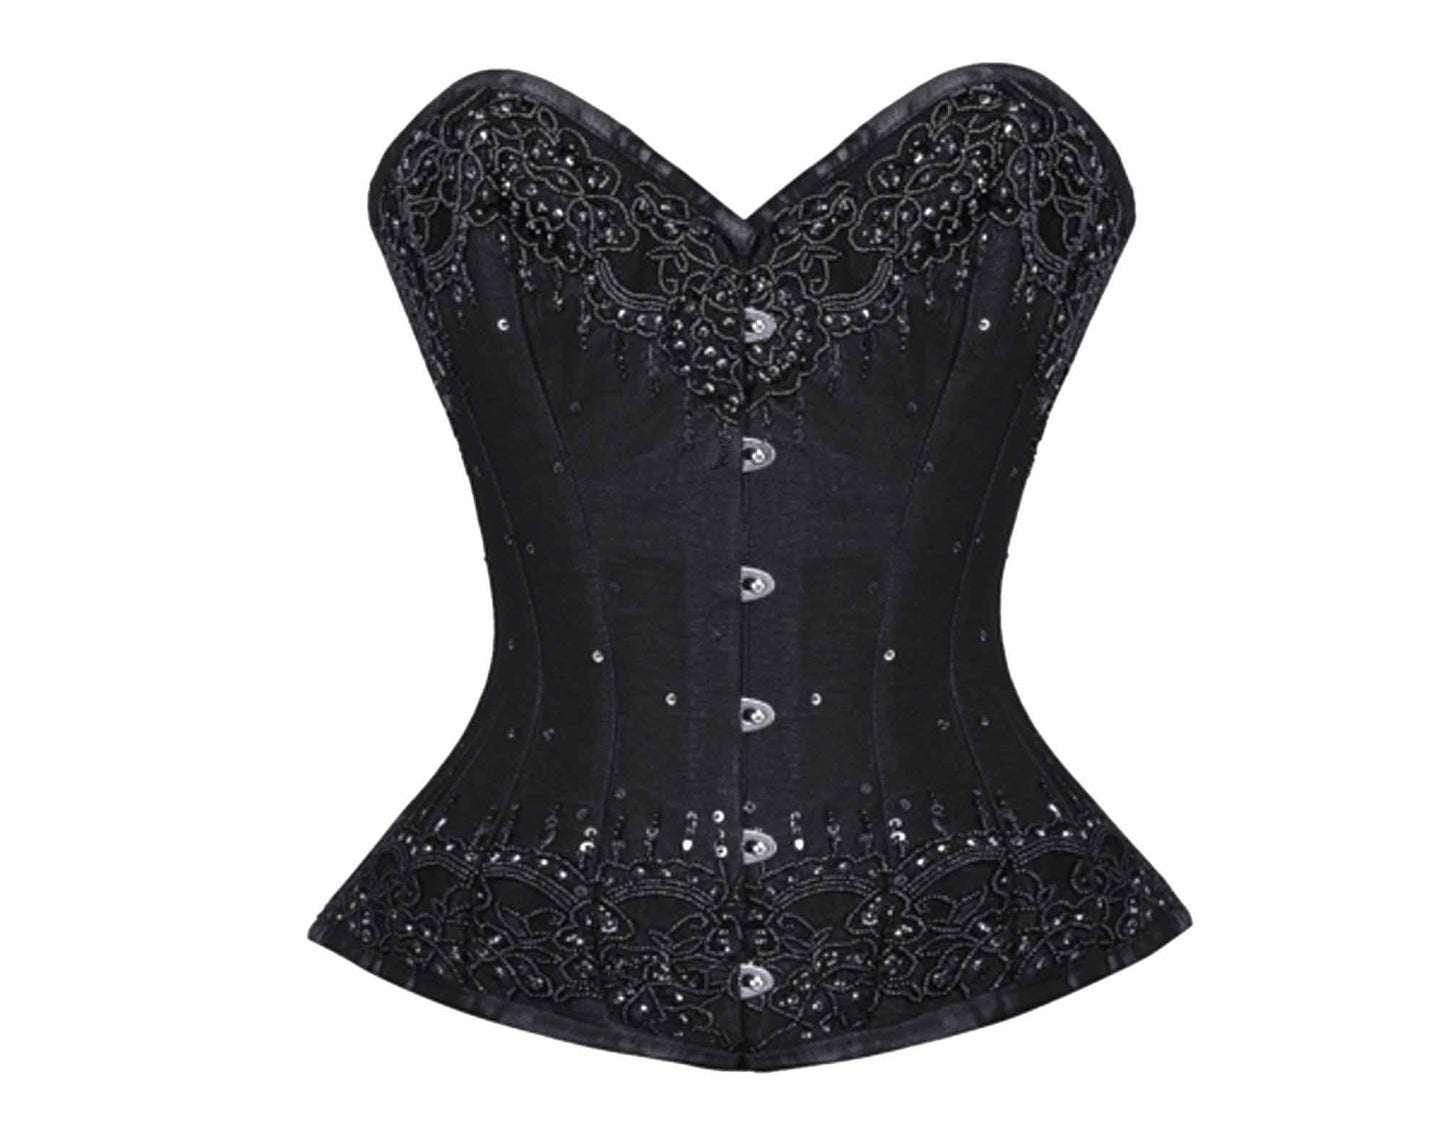 The front of the black Beaded Lace Overlay Couture Corset.